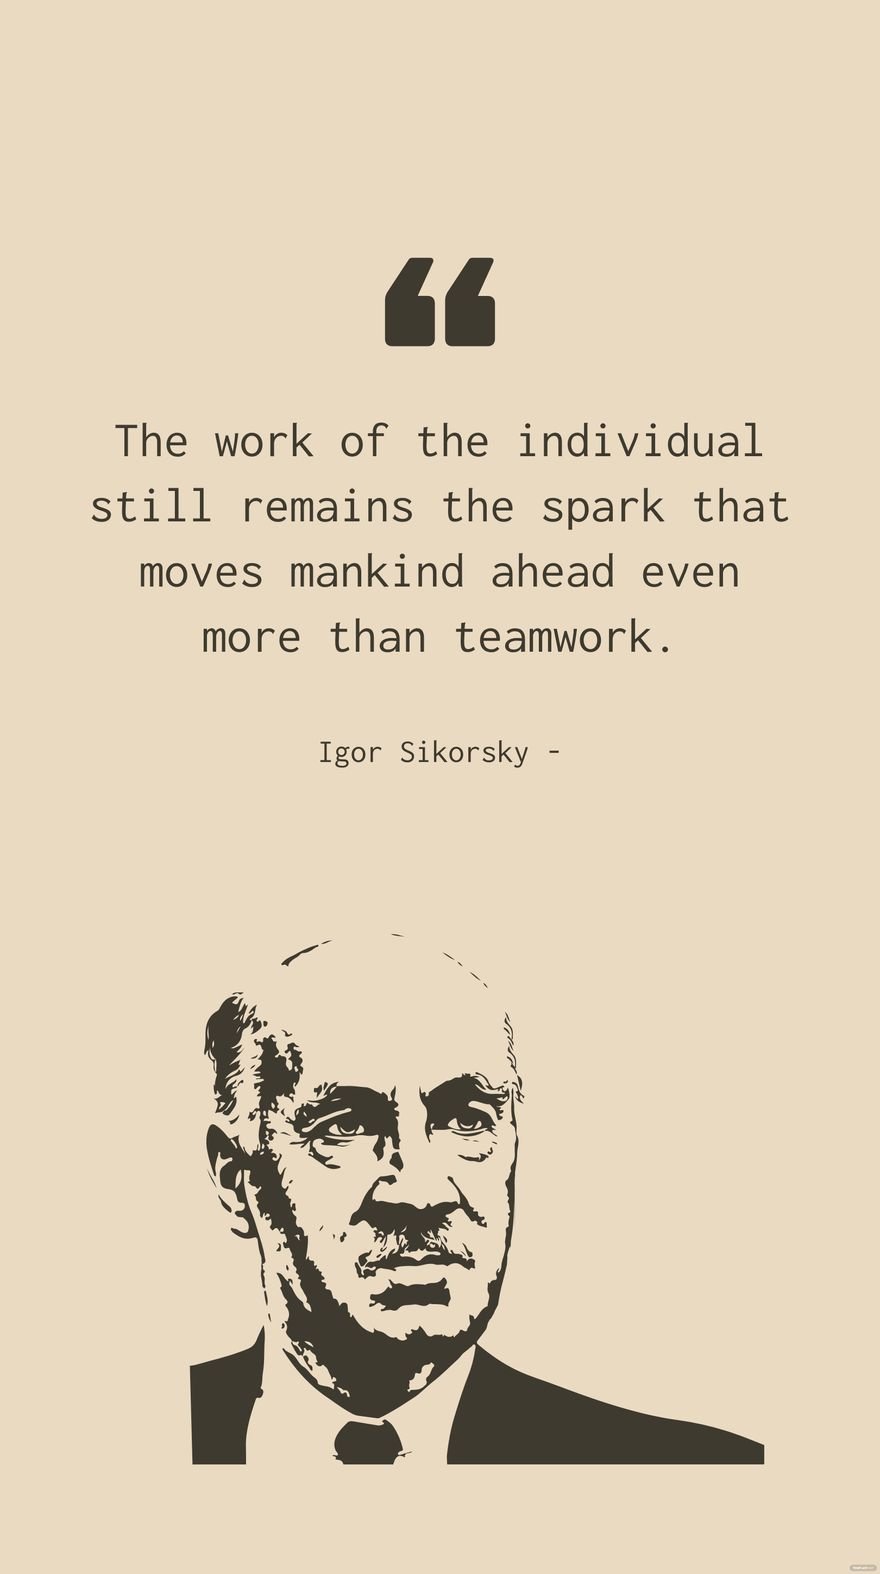 Free Igor Sikorsky - The work of the individual still remains the spark that moves mankind ahead even more than teamwork. in JPG